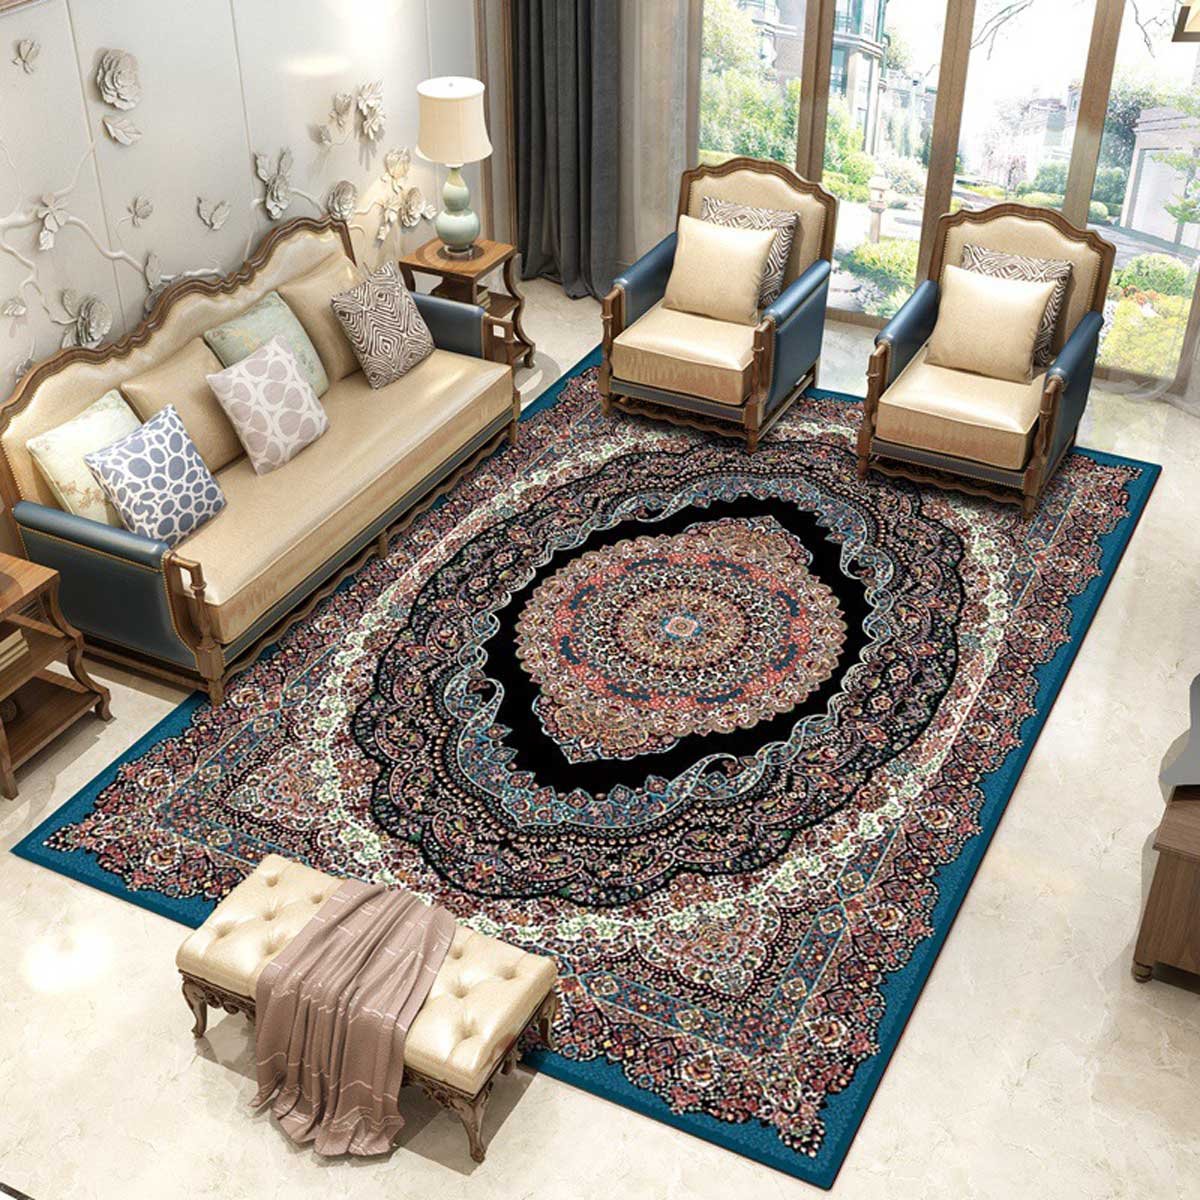 Adorn the Floor with a Persian Rug